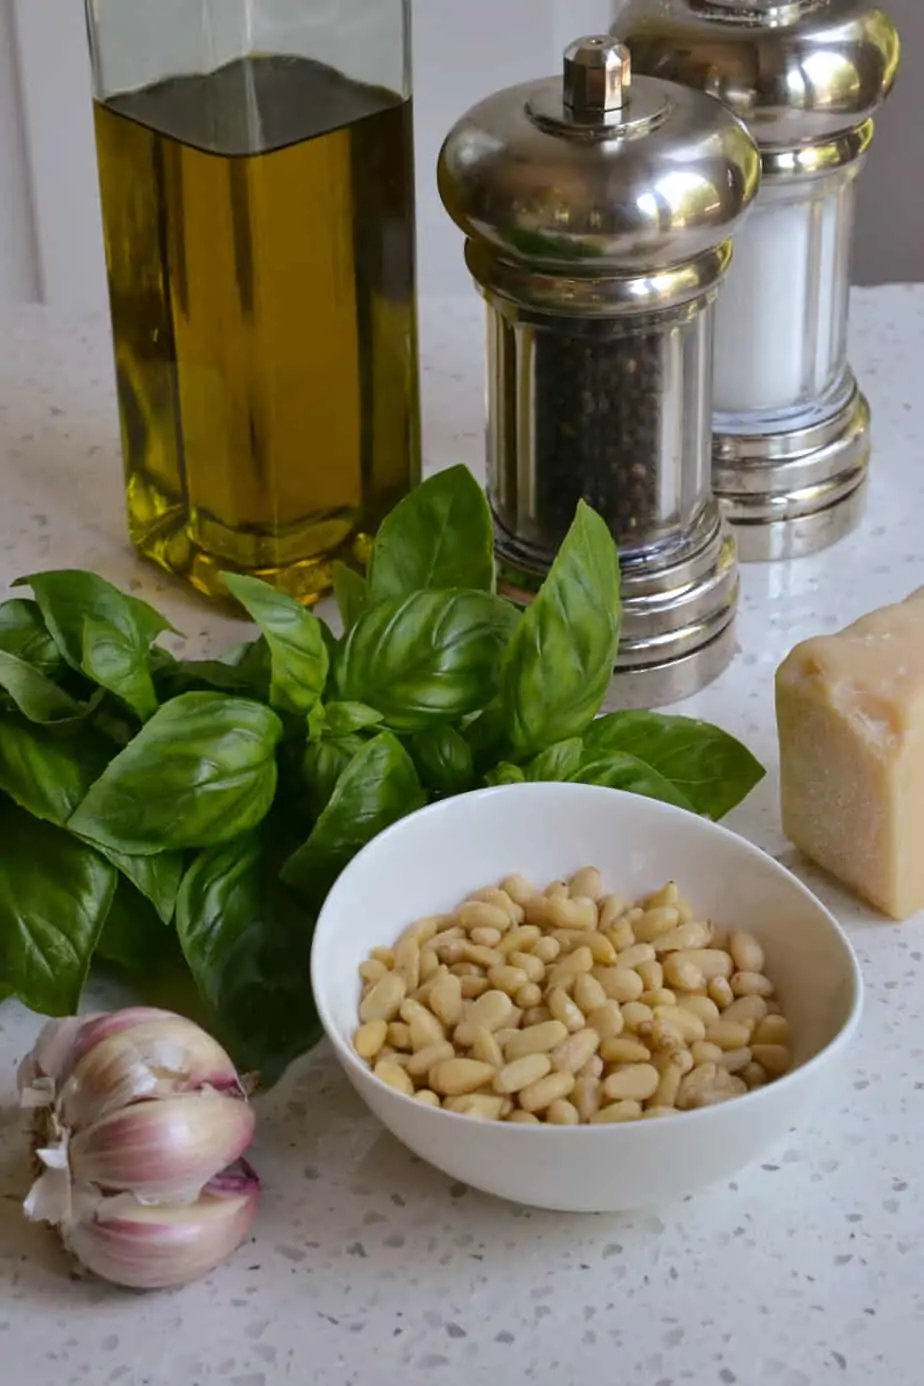 Pesto sauce is made with pine nuts, basil, garlic, Parmesan Cheese, and olive oil. 